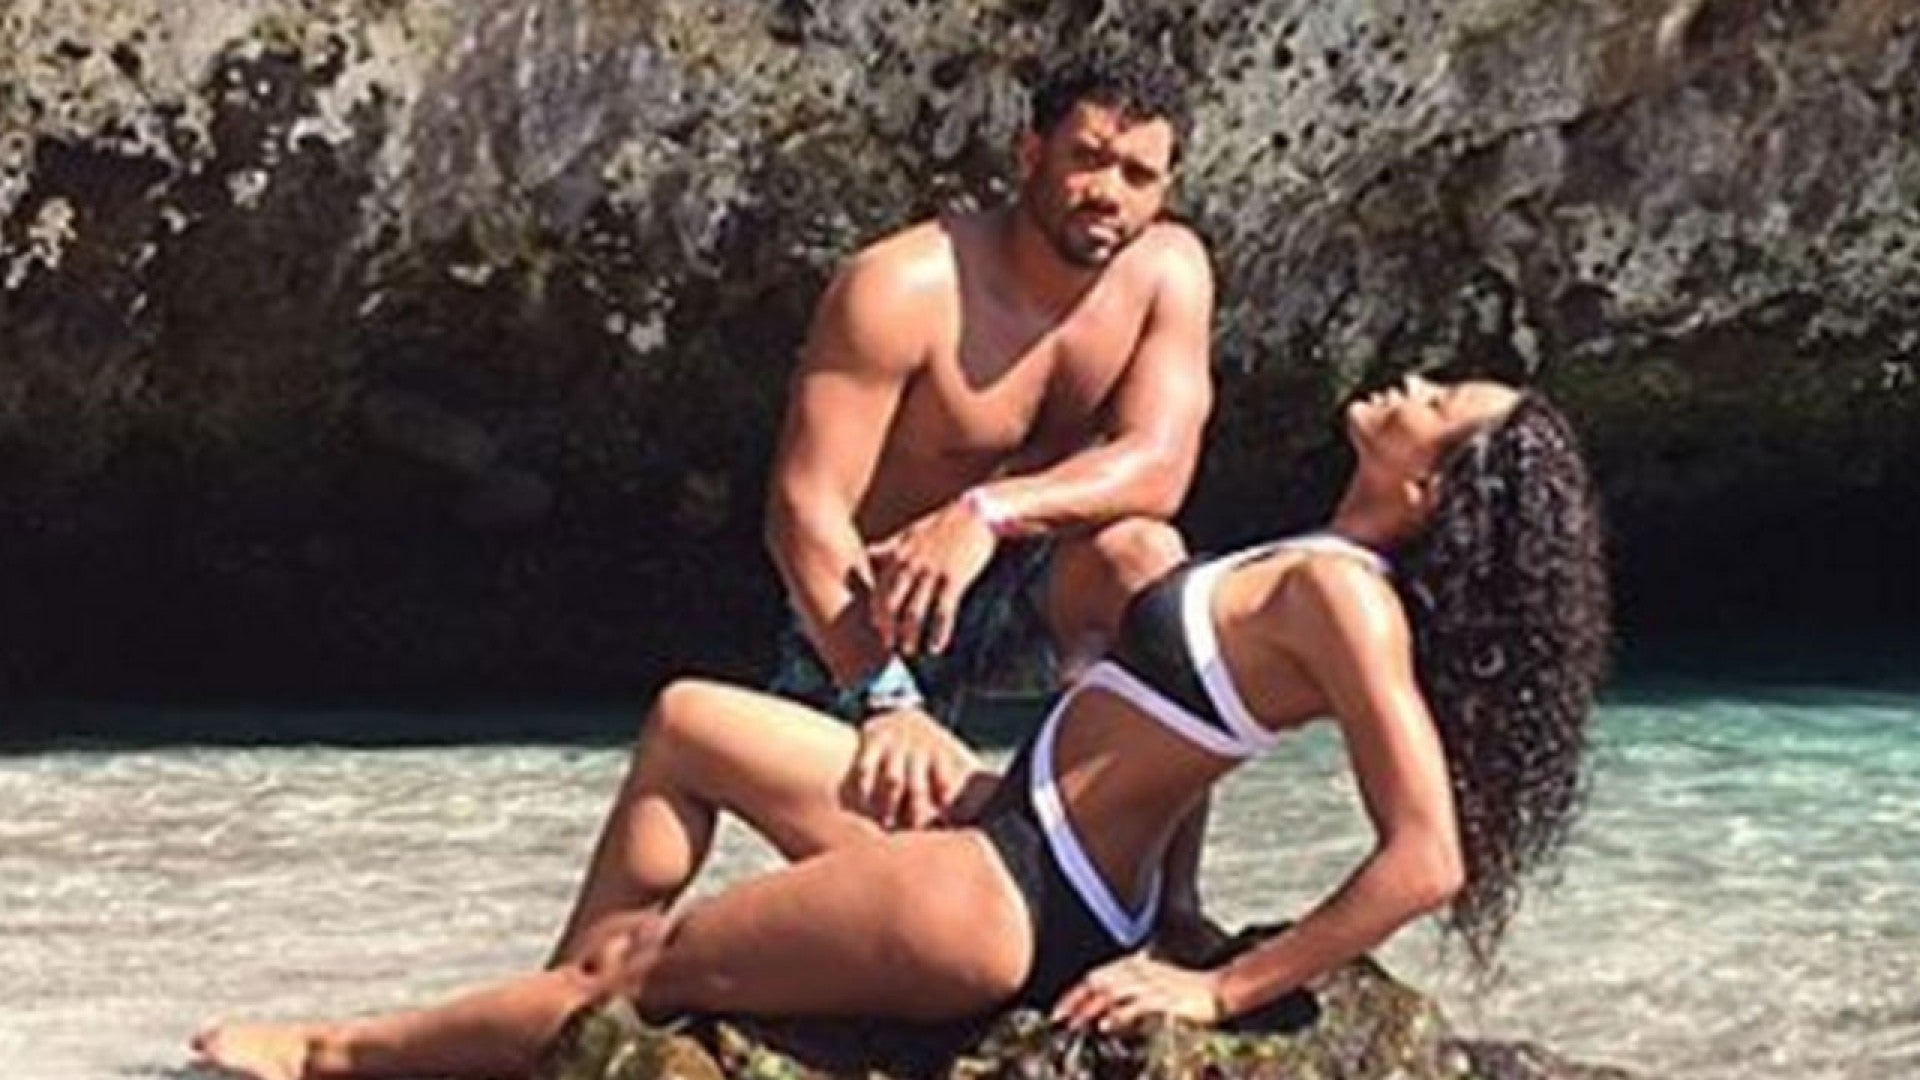 Ciara and Russell Wilson Post Sexy Photos from Tropical Getaway in Mexico